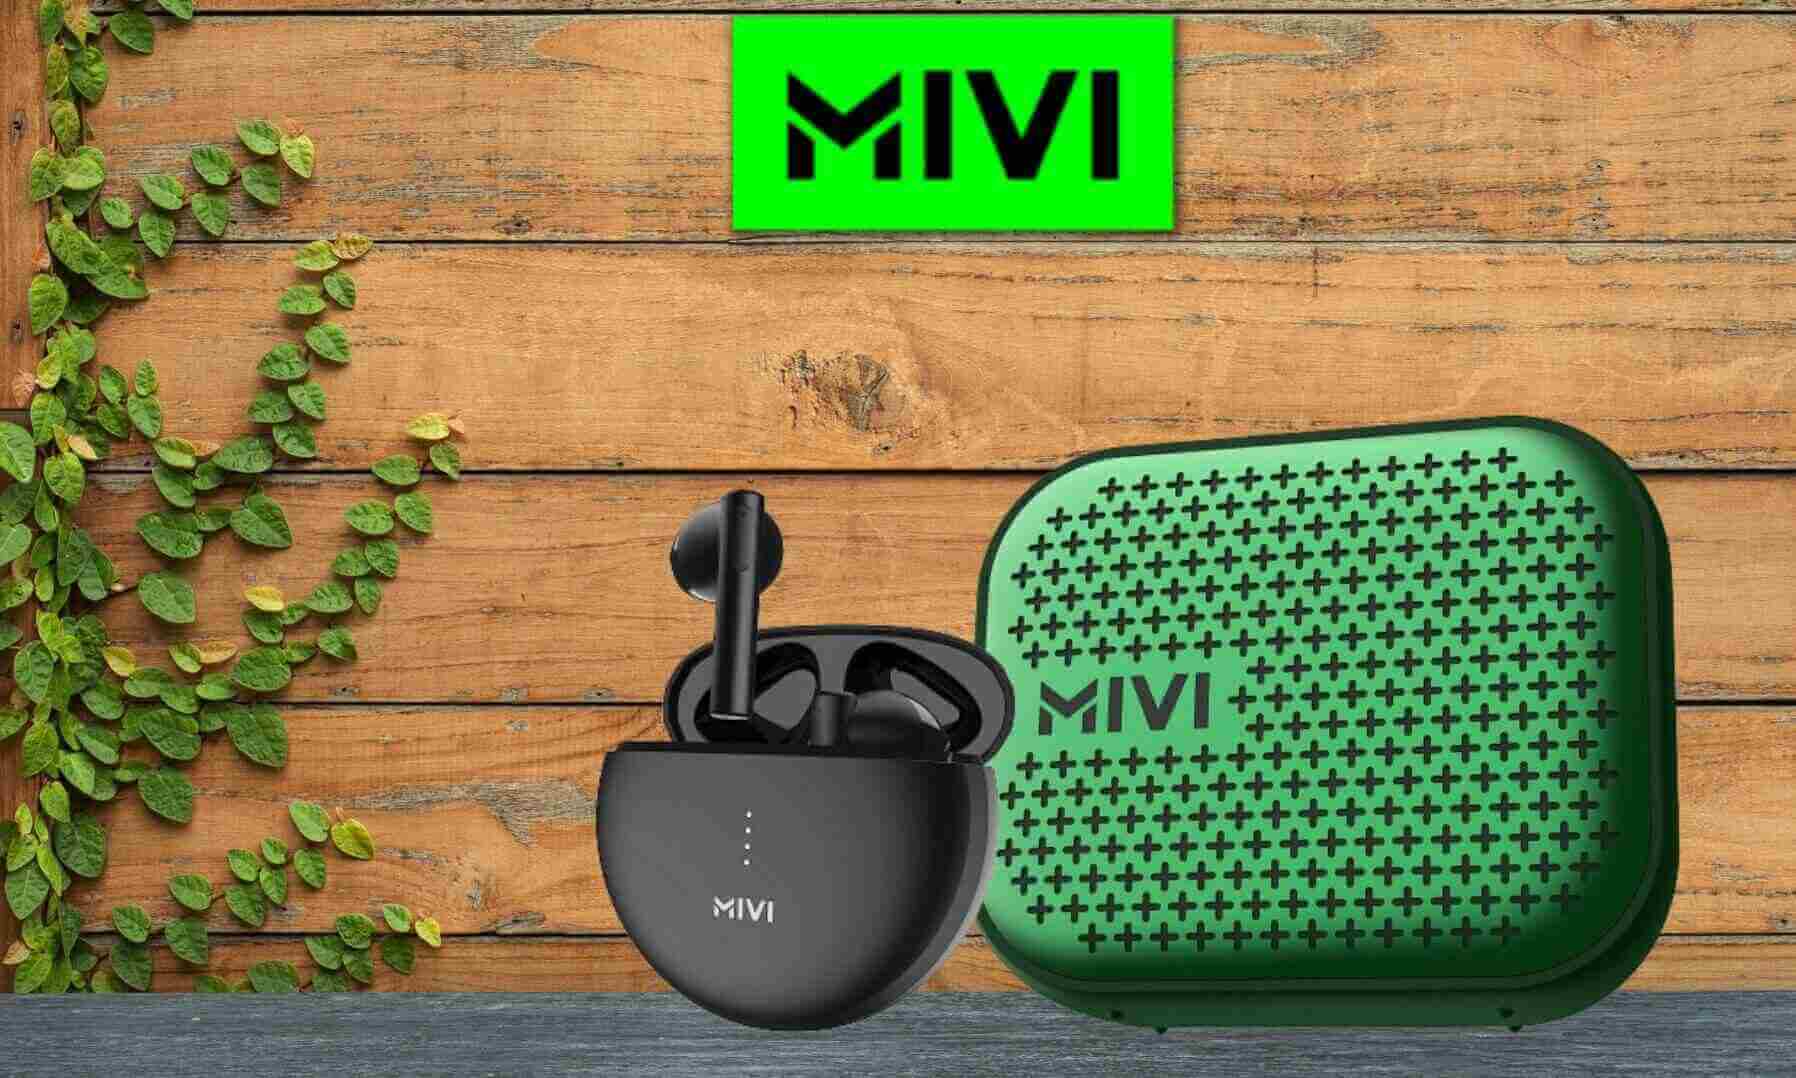 Is Mivi a Good Brand